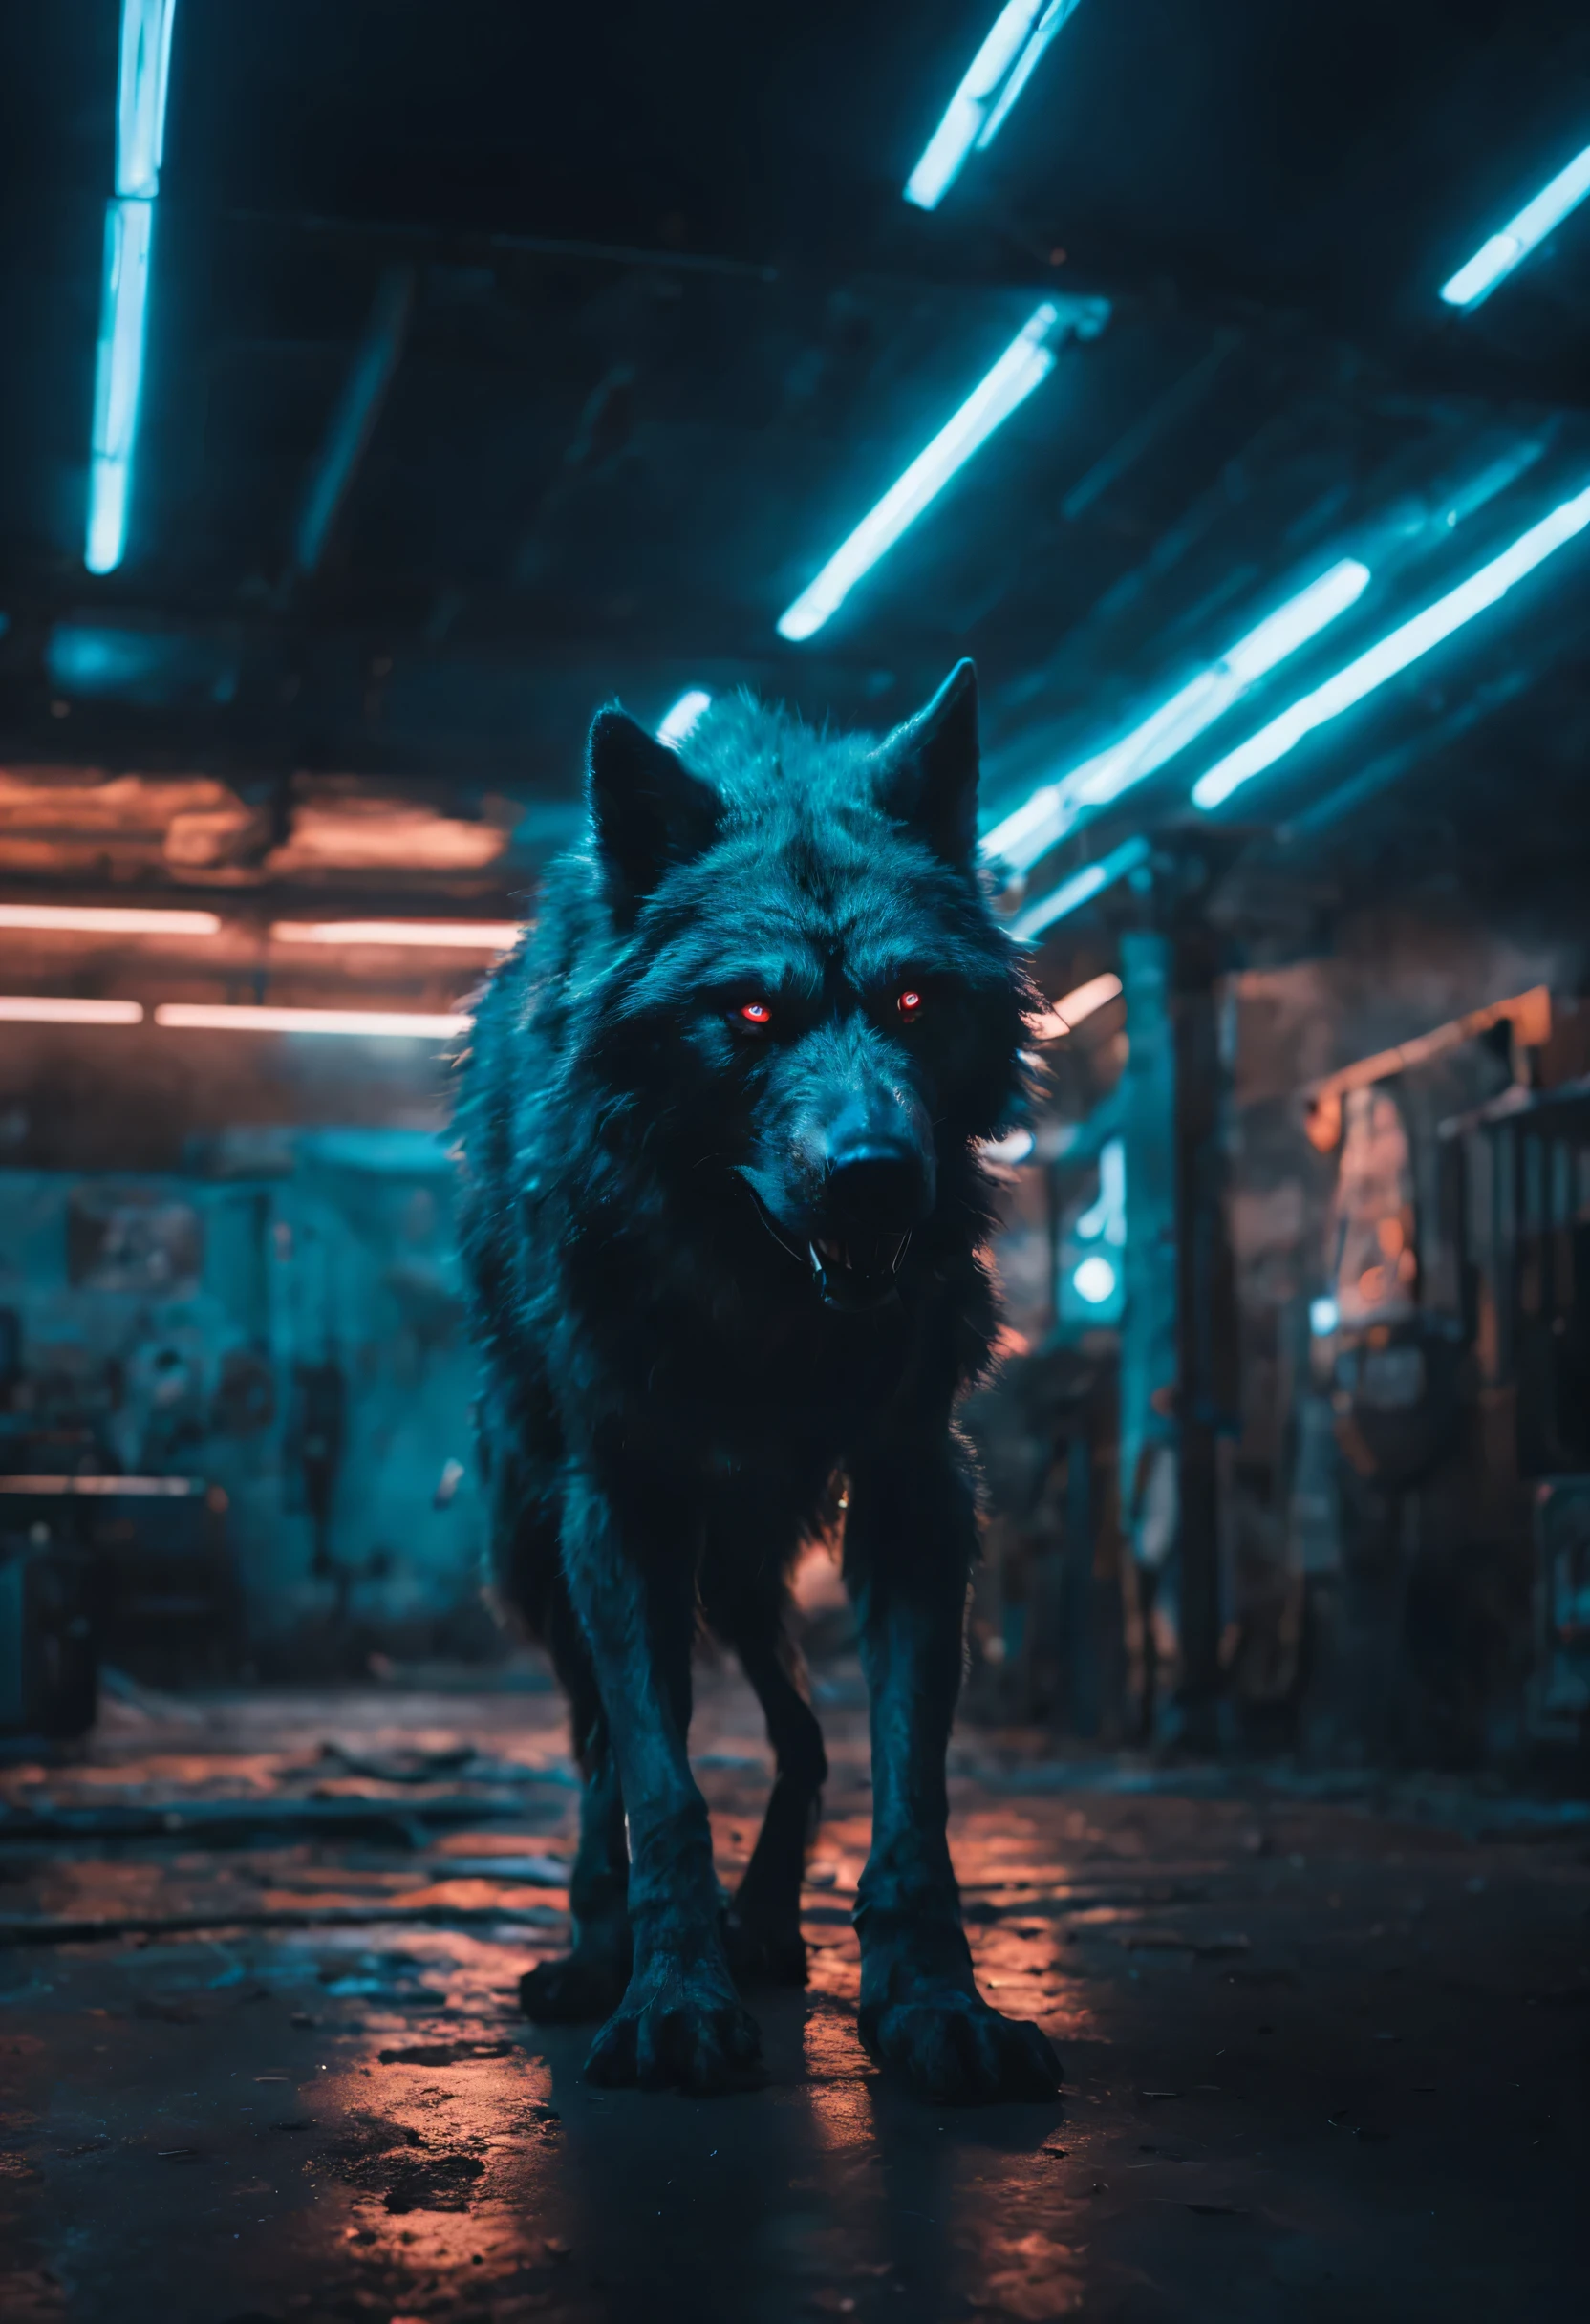 Intriguing and scary werewolf far from view in a very detailed abandoned gas station at night. atmosfera de terror. luzes fluorescentes desbotadas no teto. nuances azuis nos destaques. gigantic thunder in the sky. ambientes fortemente escuros. cinematographic. fotografia hiperdetalhada. 8k. Rule of Thirds.
